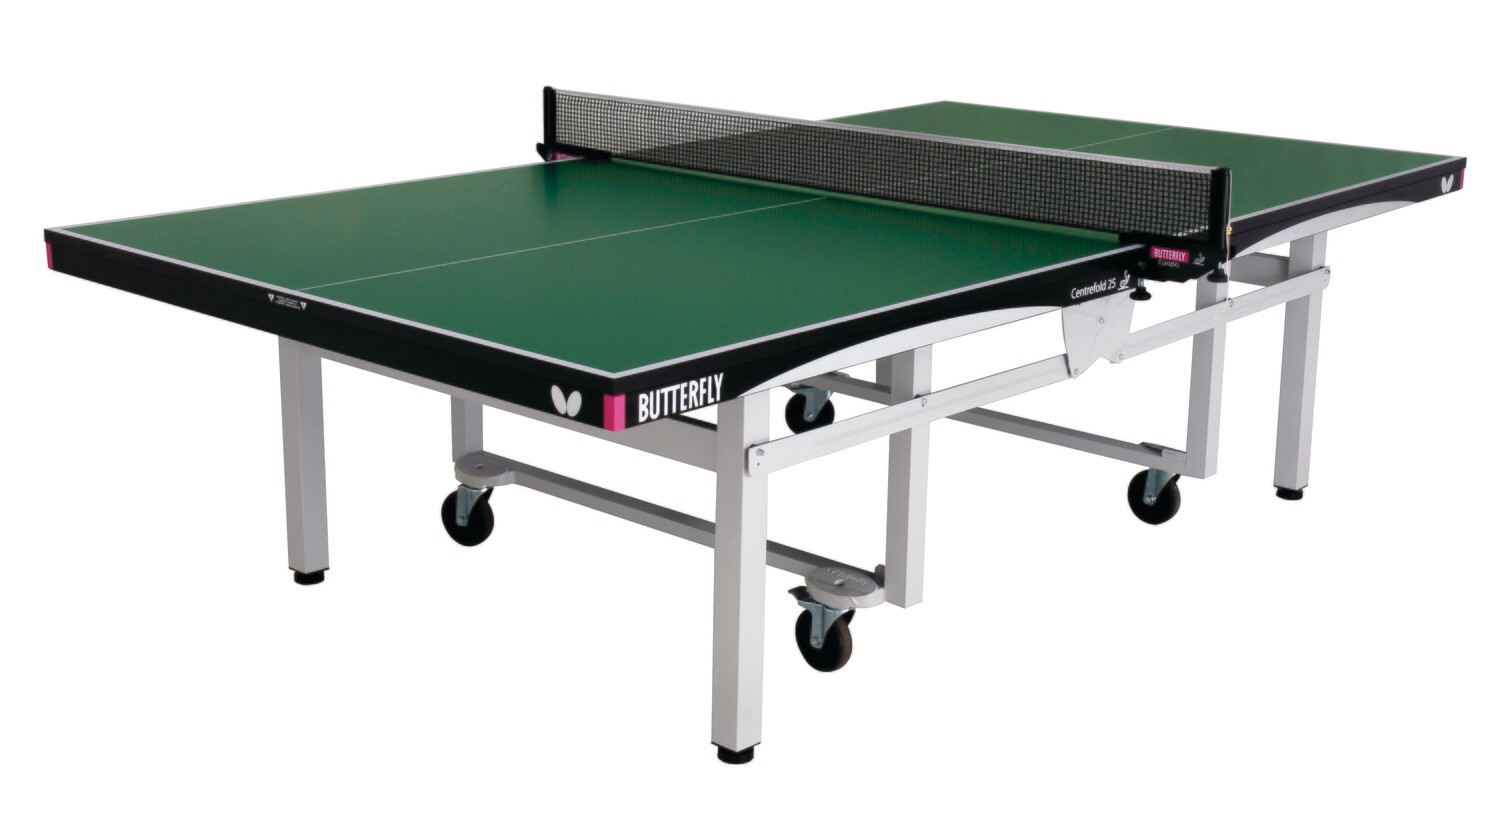 Butterfly Centrefold 25 Rollaway Table Tennis Table, Colour: Green